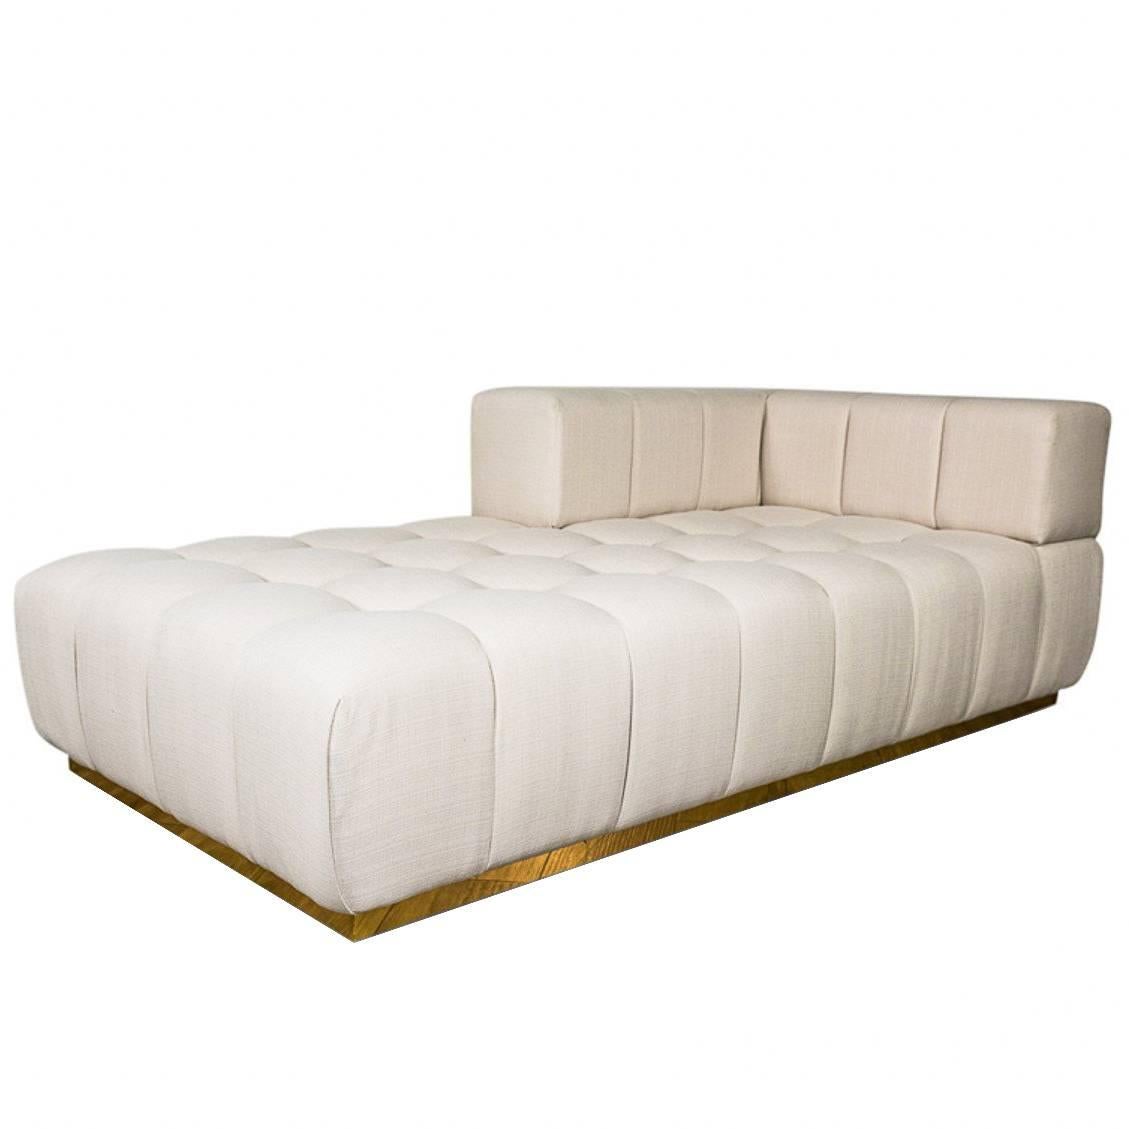 Mid-Century Style Daybed Upholstered in Cream Linen with Brass Toe-Kick For Sale